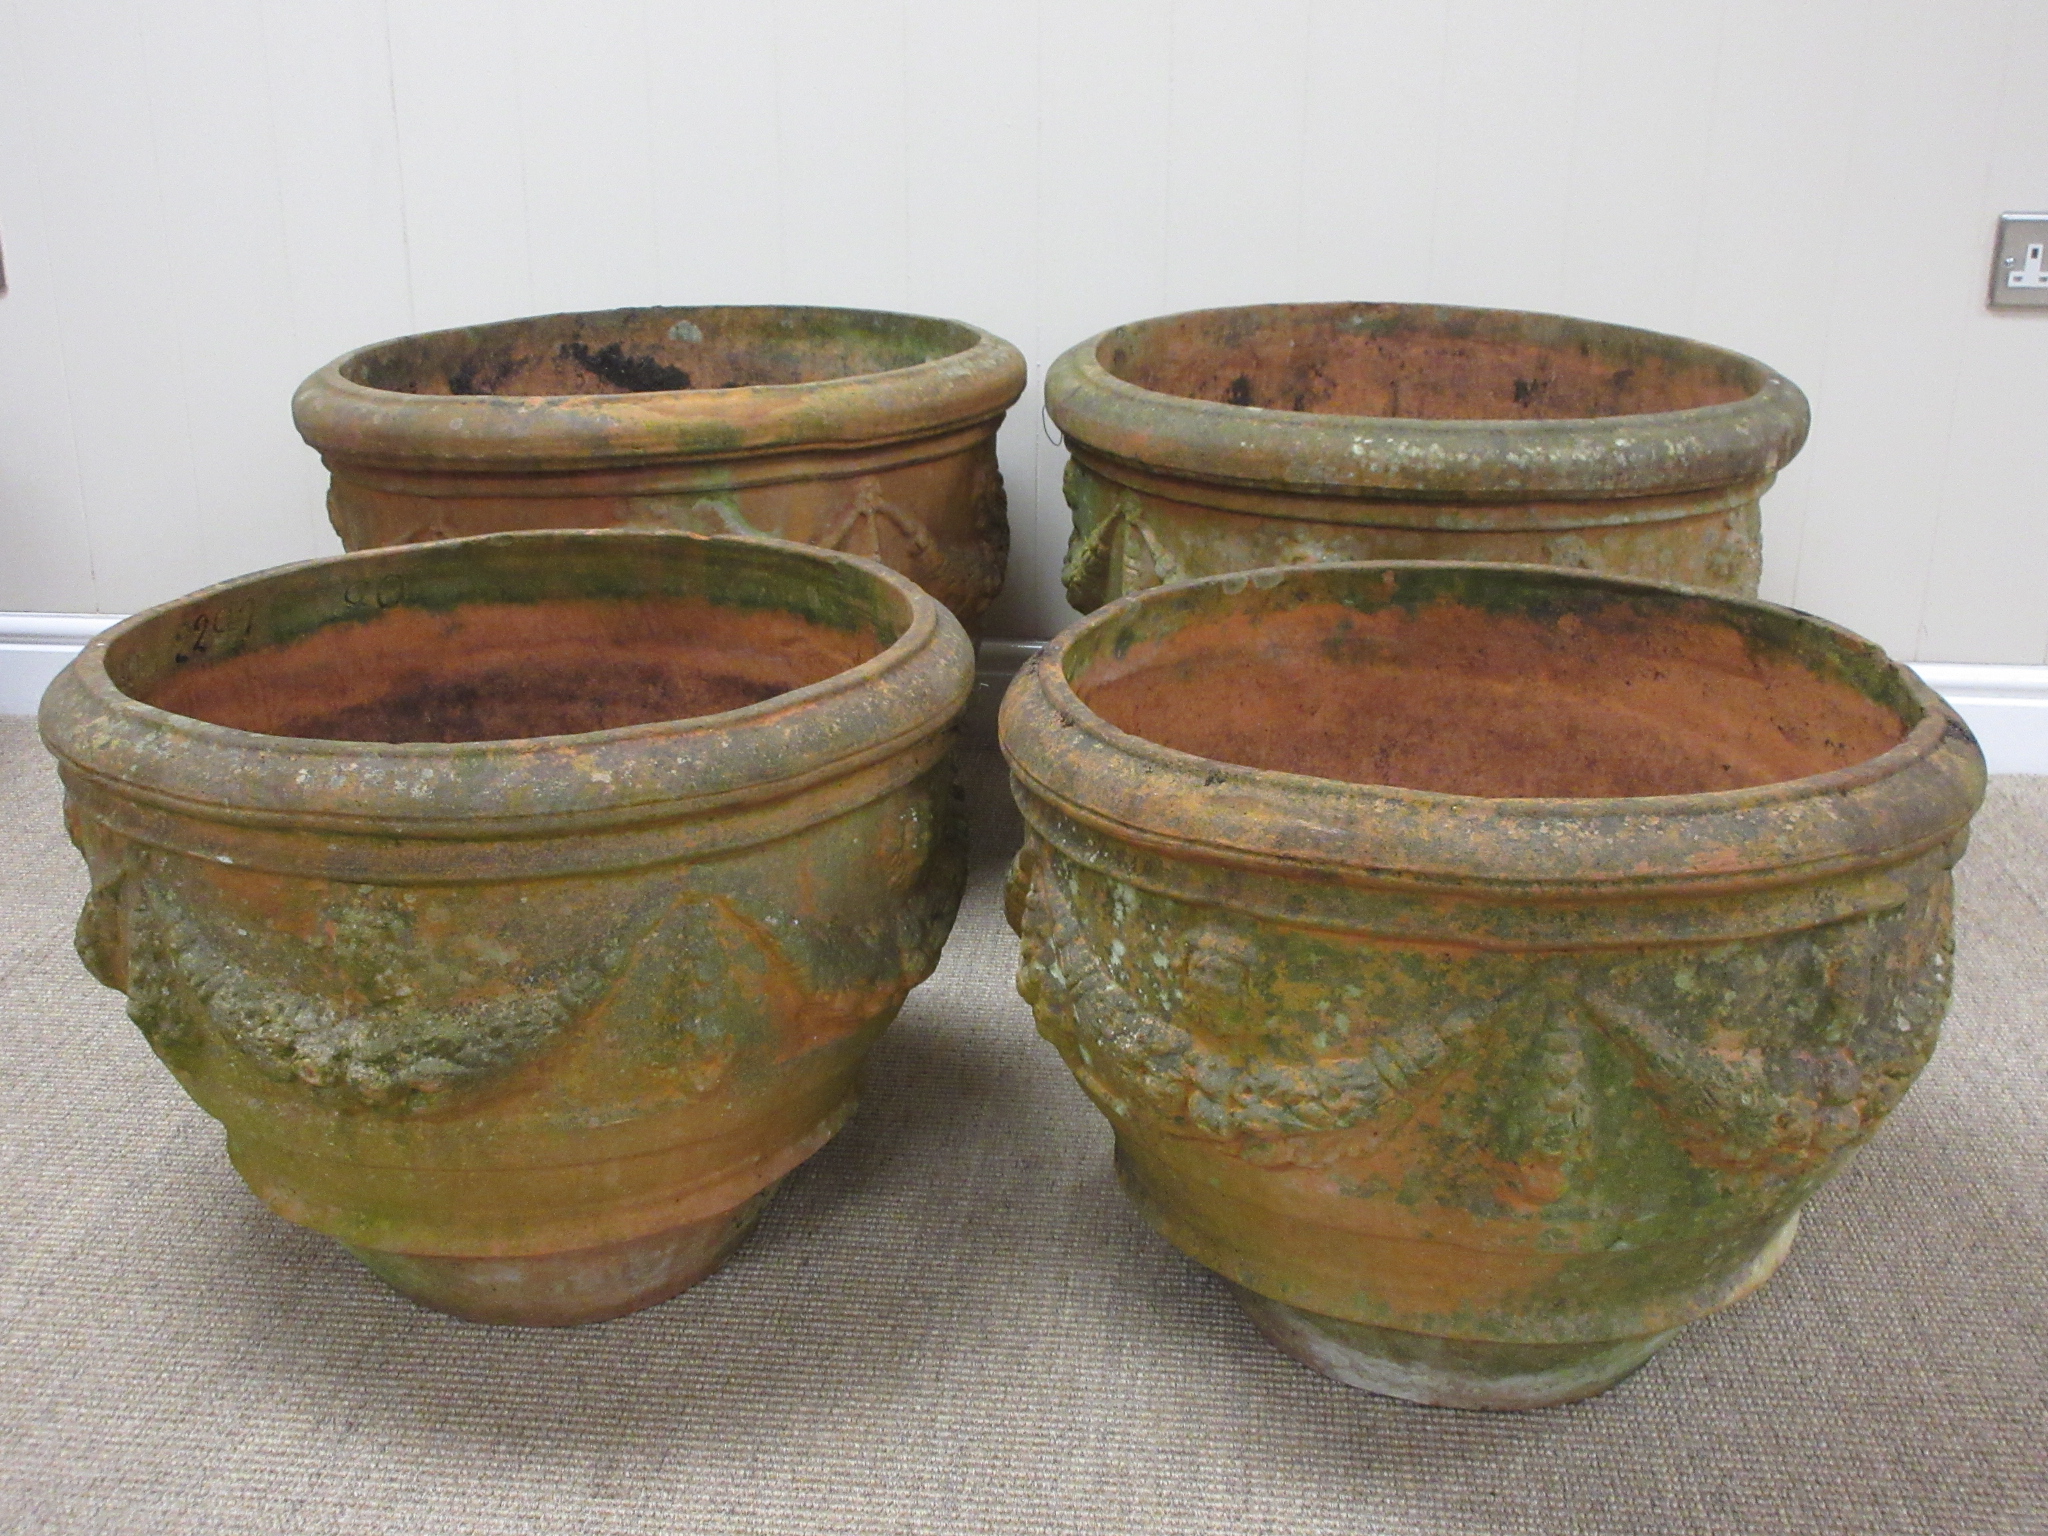 Four terracotta Flower Pots with swag and mask designs, A/F